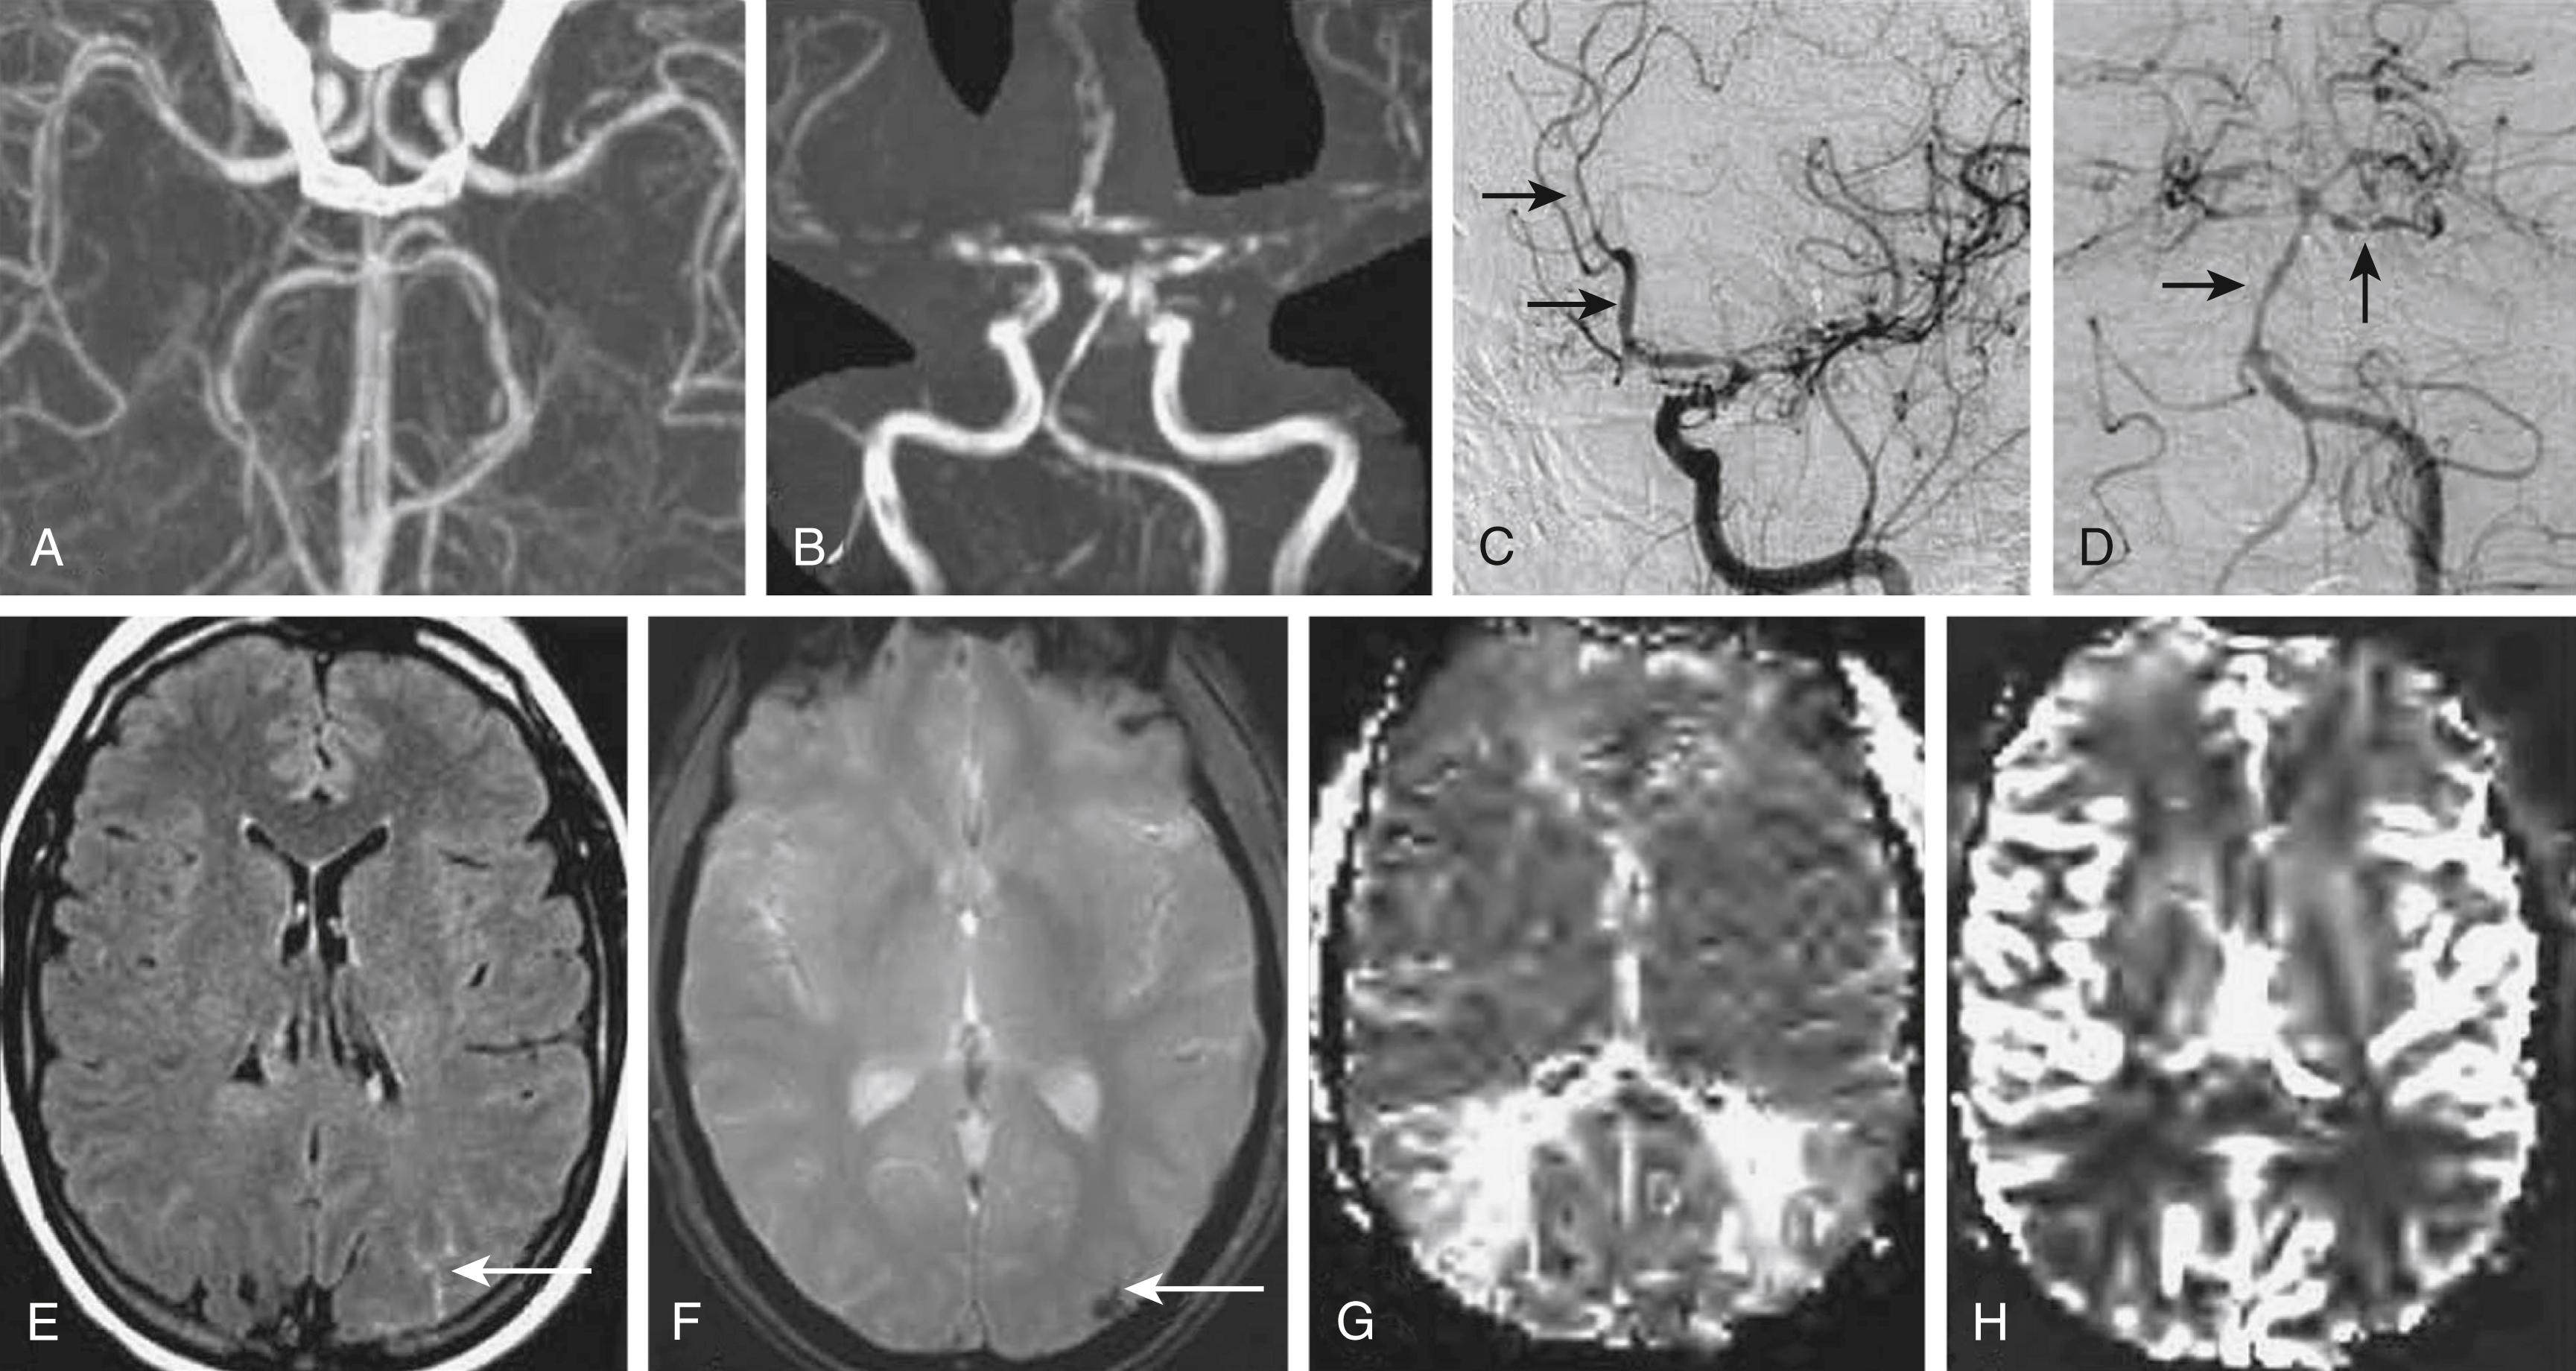 Fig. 37.1, Typical case of reversible cerebral vasoconstriction syndrome (RCVS). A 44-year-old woman with prior migraine and depression experienced a sudden, excruciating (thunderclap) headache while exercising. The headache did not resemble her prior migraines and resolved over 30 minutes. Over the next week, three more thunderclap headaches occurred. Blood pressure and neurologic findings were normal. CT angiogram (A), MR angiogram (B), and digital subtraction angiogram (C and D) show segmental narrowing and dilatation of multiple intracerebral arteries. Note the abnormal dilatation followed by abrupt narrowing of the anterior cerebral artery ( arrows, C), the basilar artery ( horizontal arrow, D), and the superior cerebellar artery ( vertical arrow, D). This “sausage on a string” appearance is characteristic of RCVS. Brain MRI showed sulcal hyperintensity in the left occipital lobe on axial fluid-attenuated inversion recovery (FLAIR) images ( arrow, E), and corresponding sulcal hypointensity on gradient-echo images ( arrow, F), consistent with cortical surface subarachnoid hemorrhage. Perfusion-weighted MRI showed abnormally increased mean transit time (G) and reduced cerebral blood flow (H) in the “watershed” regions of the bilateral middle and posterior cerebral arteries; fortunately these regions did not progress to infarction. Cerebrospinal fluid examination findings were normal. Results of extensive tests for vasculitis were negative. She was treated with nimodipine. Over the next 2 weeks, her headaches resolved, and follow-up brain imaging showed resolution of the subarachnoid blood and vascular abnormalities.